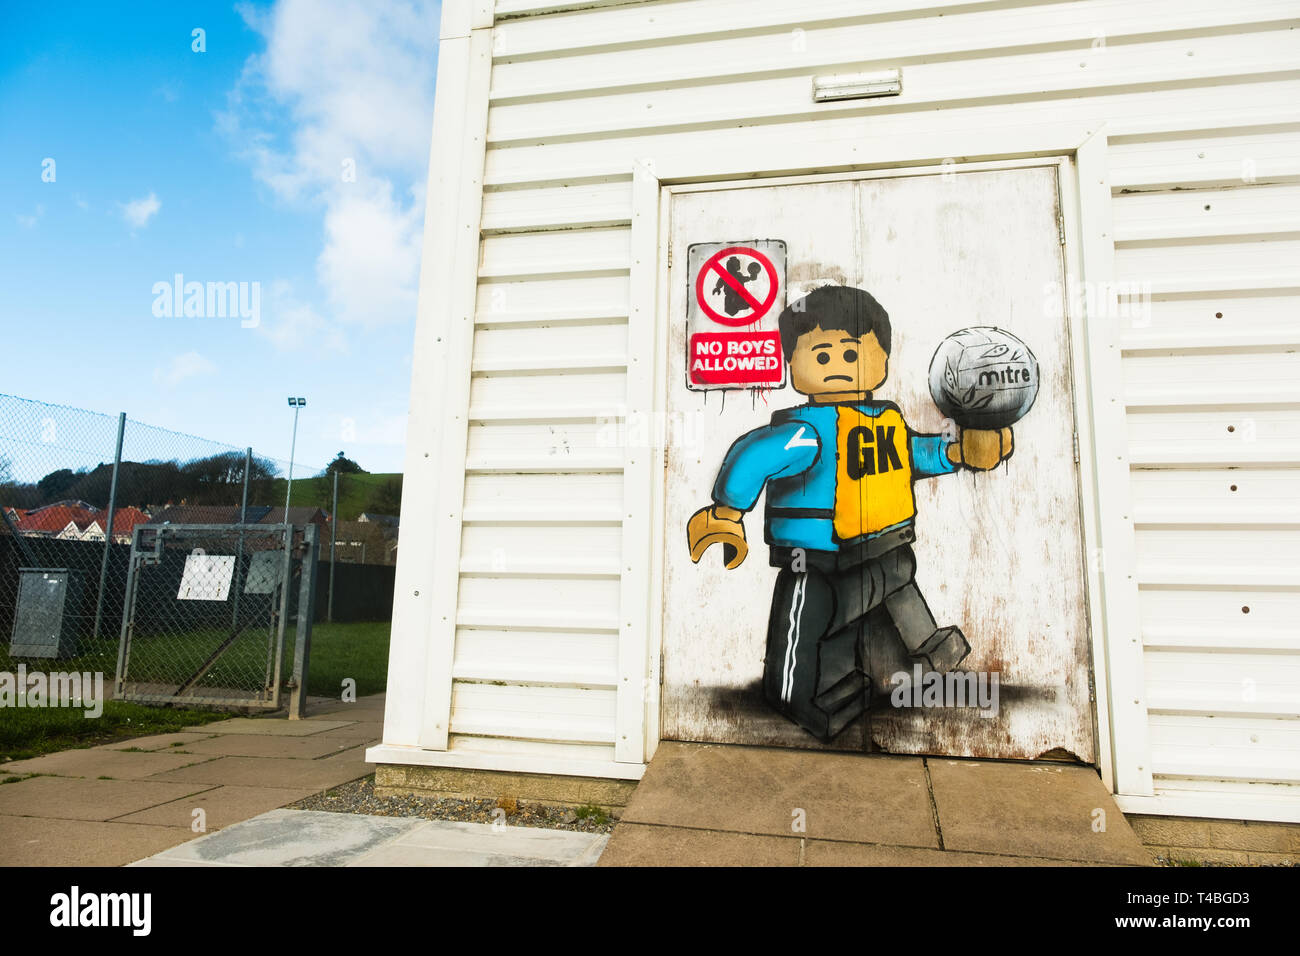 'No Boys Allowed' Graffiti by James Ame - Ame72 (The `Lego Guy)  -  on the exterior of the leisure centre in Aberystwyth, showing an unhappy boy in a GK  netball vest, in reference to the ban by the Urdd ( a welsh langiage youth organisation) on boys competing in netball competitions.  March 10 2019 Stock Photo